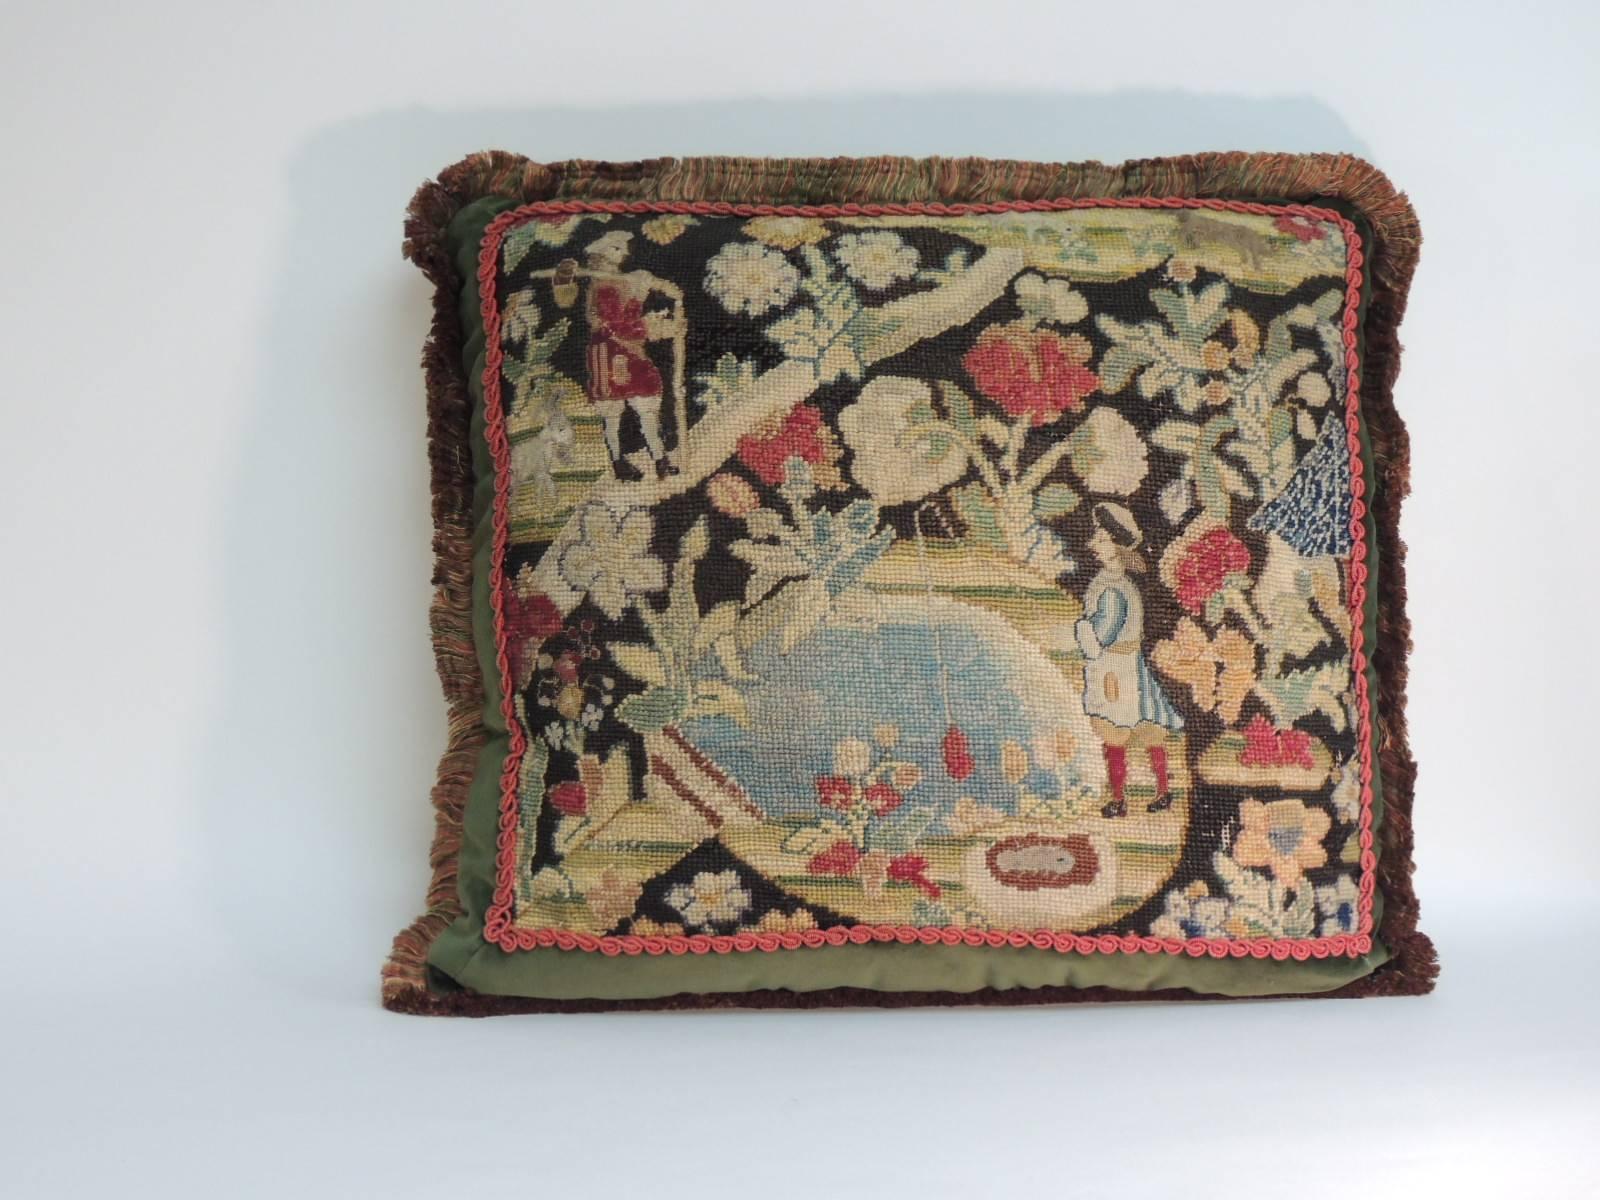 18th century French tapestry pillow.
18th century Gobelin tapestry pillow depicting a fishing scene in a forest; floral and animal pattern in shades of green, red, blue, gold and orange. Framed with hunter green silk velvet accentuated with a red